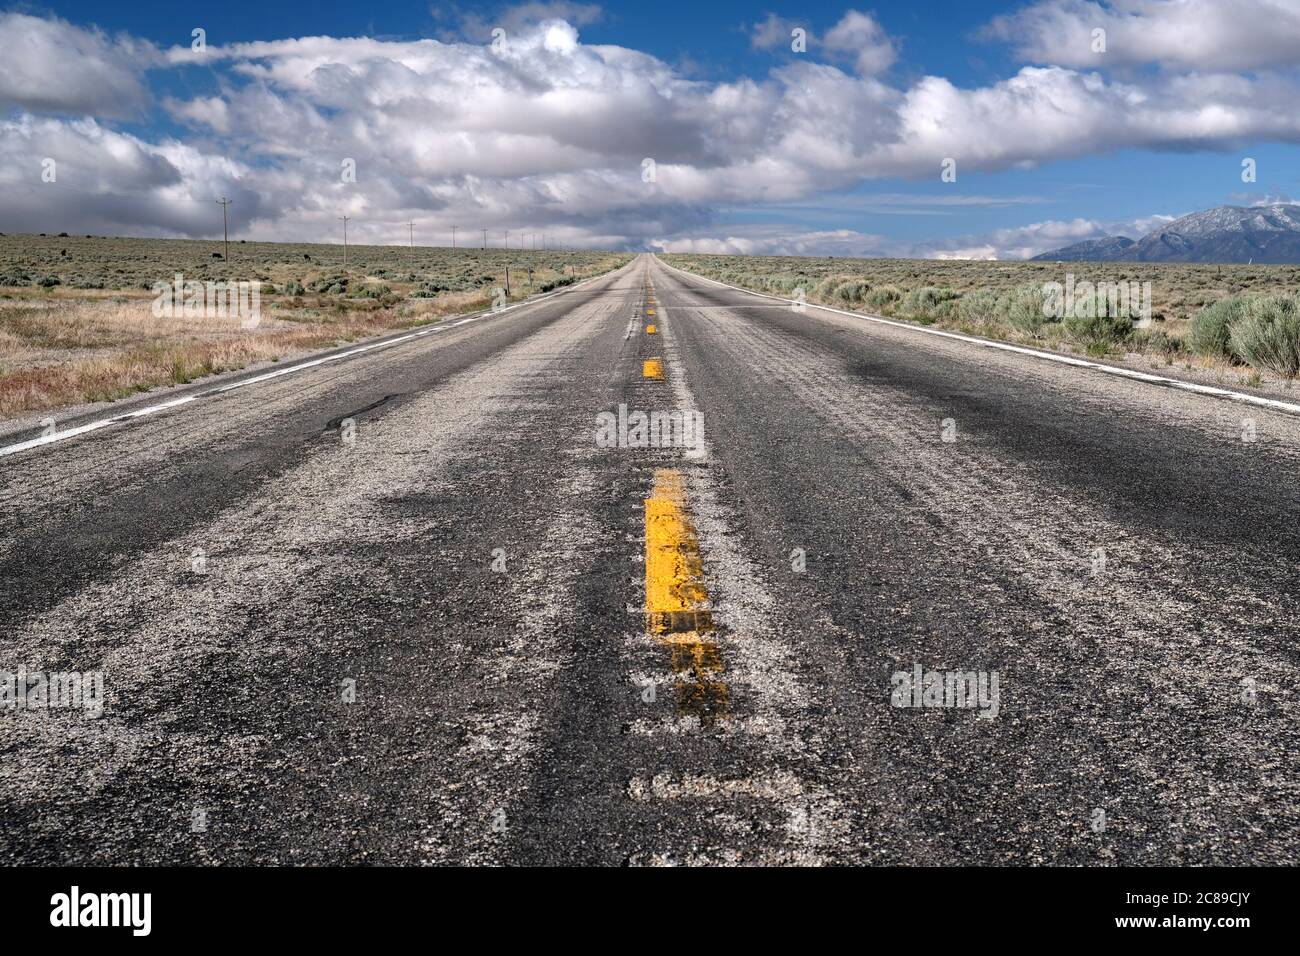 Low view looking down a beat up old asphalt highway showing dramatic perspective to the horizon along U.S. 50 in Nevada Stock Photo